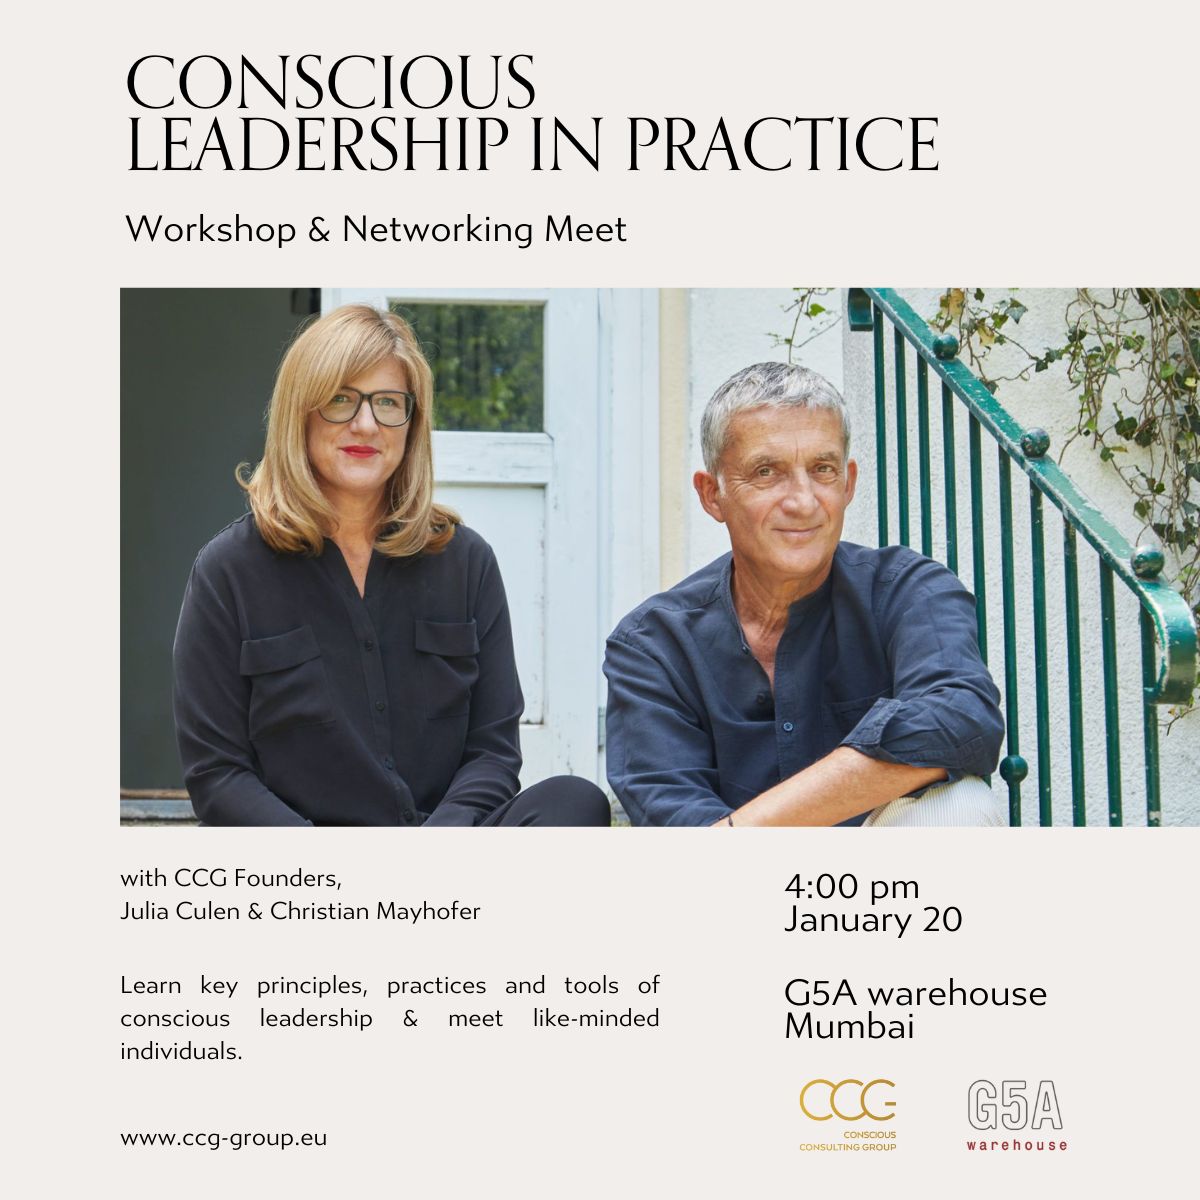 Conscious Leadership in Practice - Workshop and Networking Meet